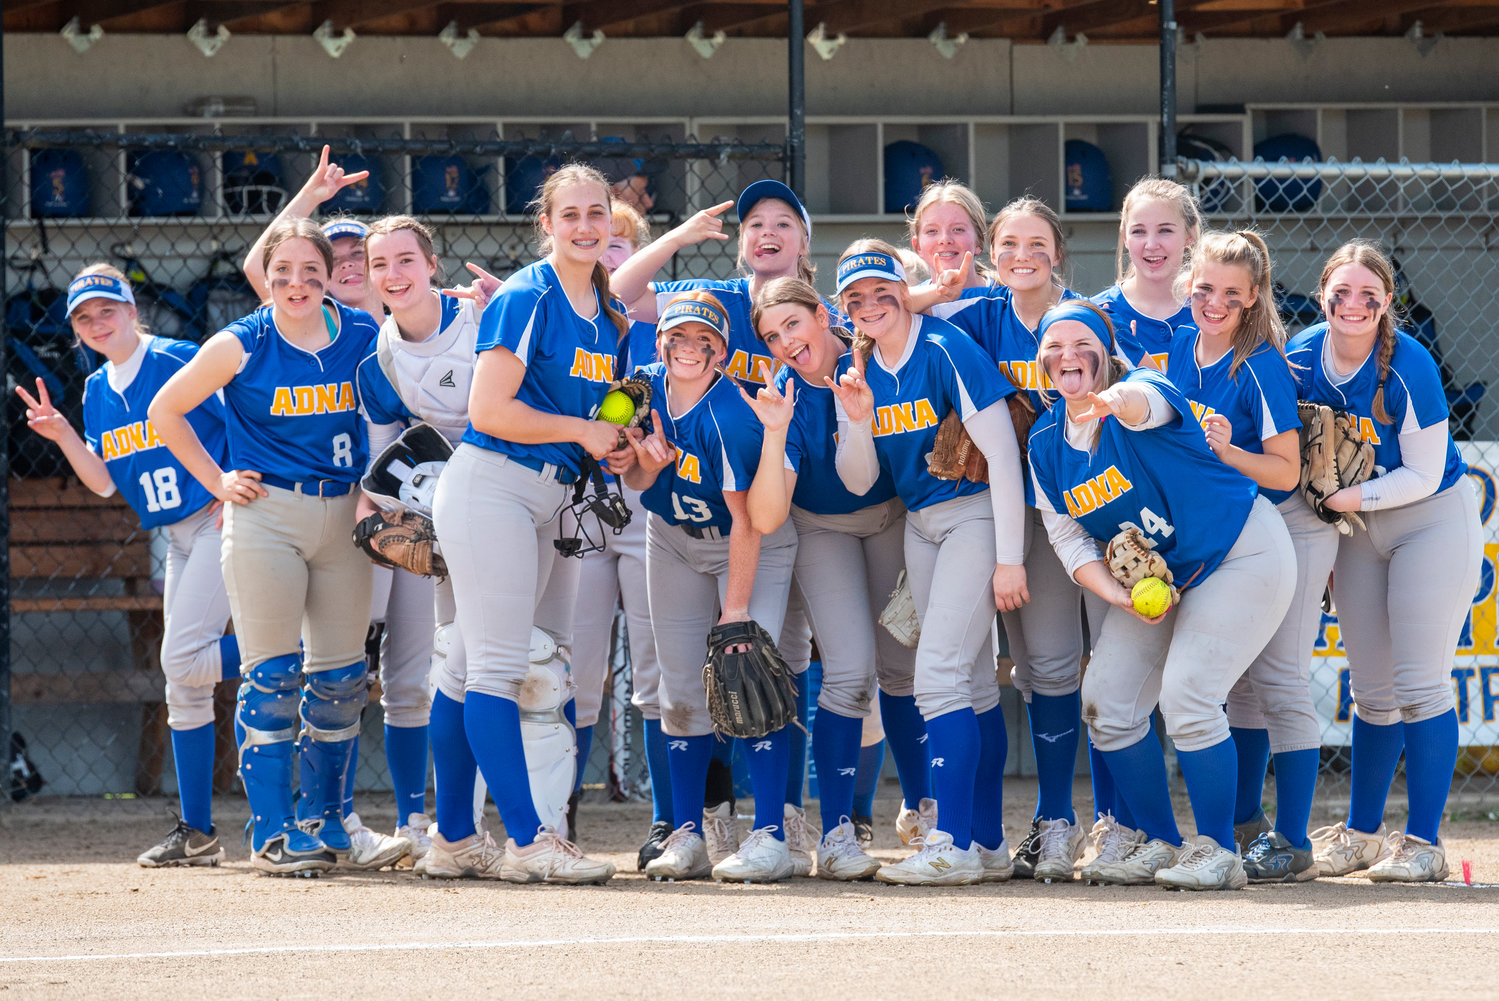 Adna softball poses for a photo before a home game against Onalaska on Wednesday, May 4.